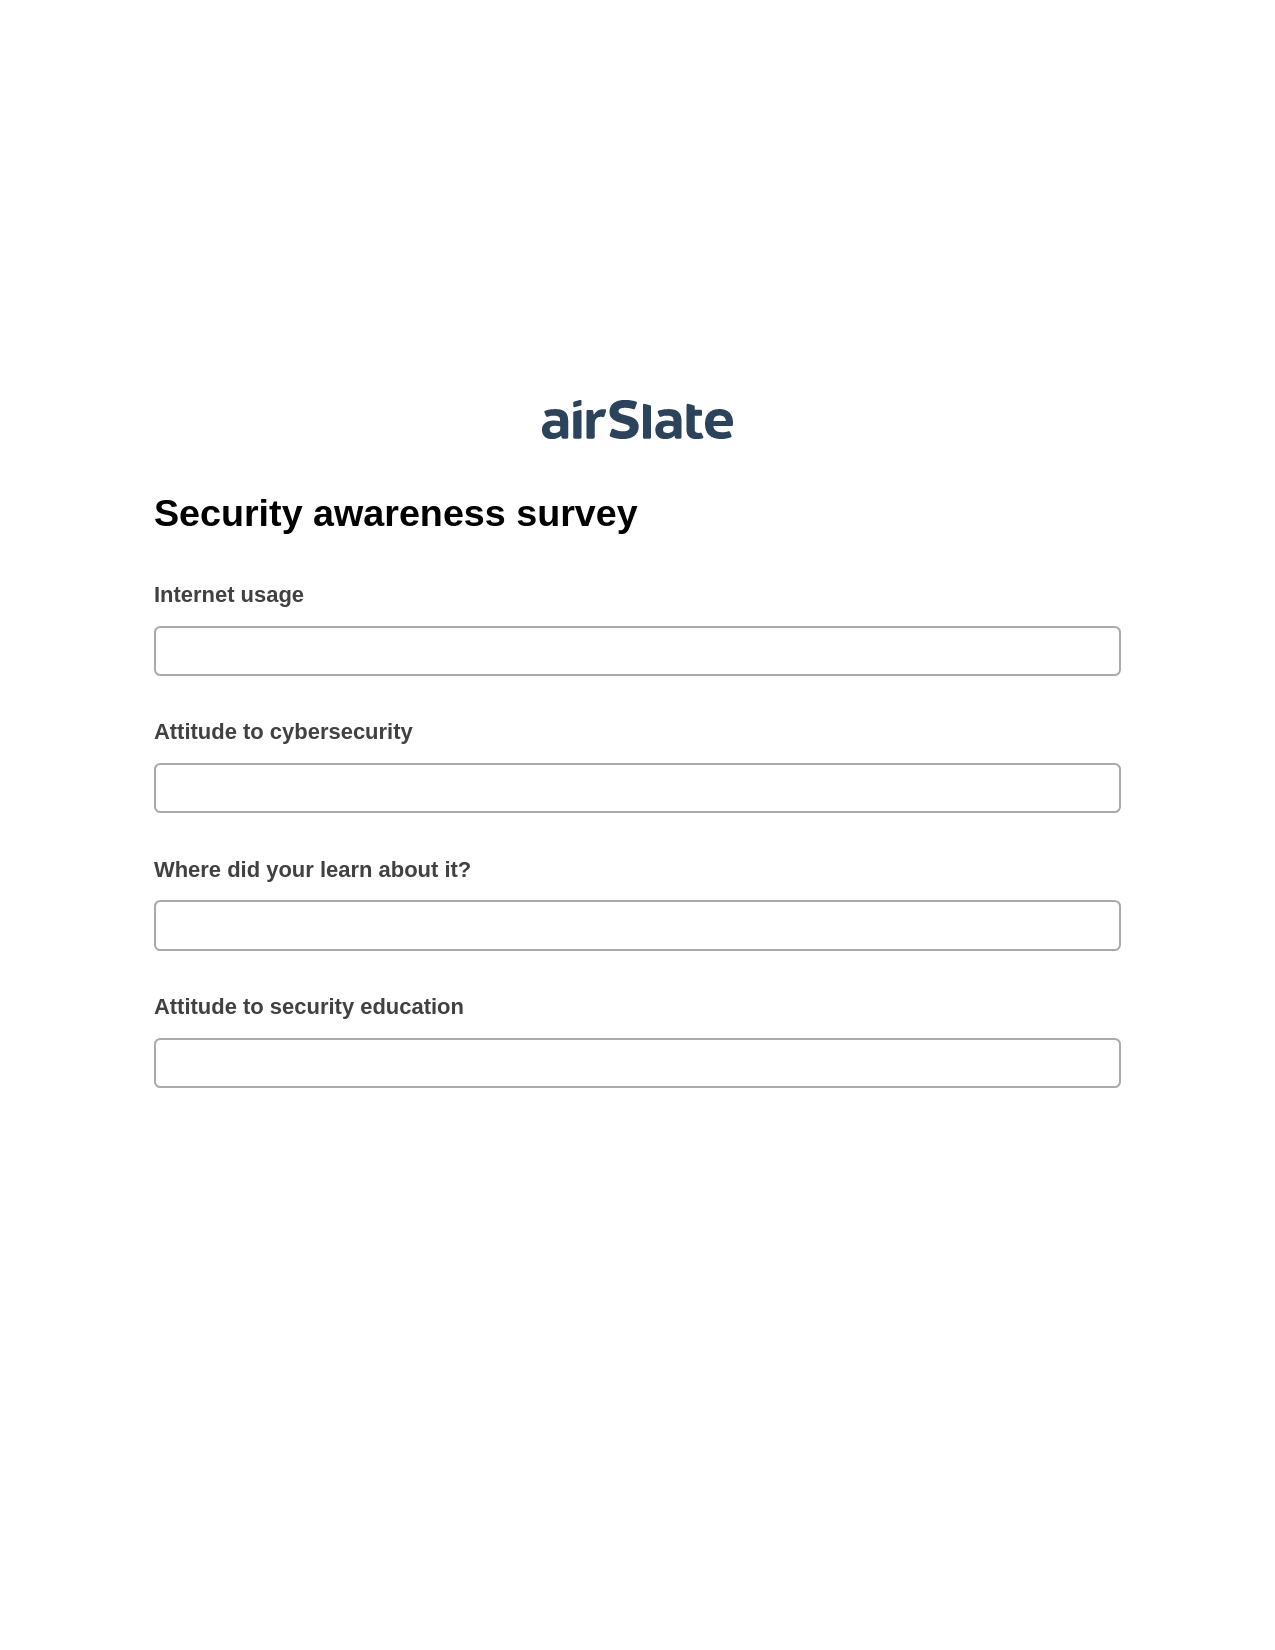 Security awareness survey Pre-fill from CSV File Bot, Roles Reminder Bot, Box Bot